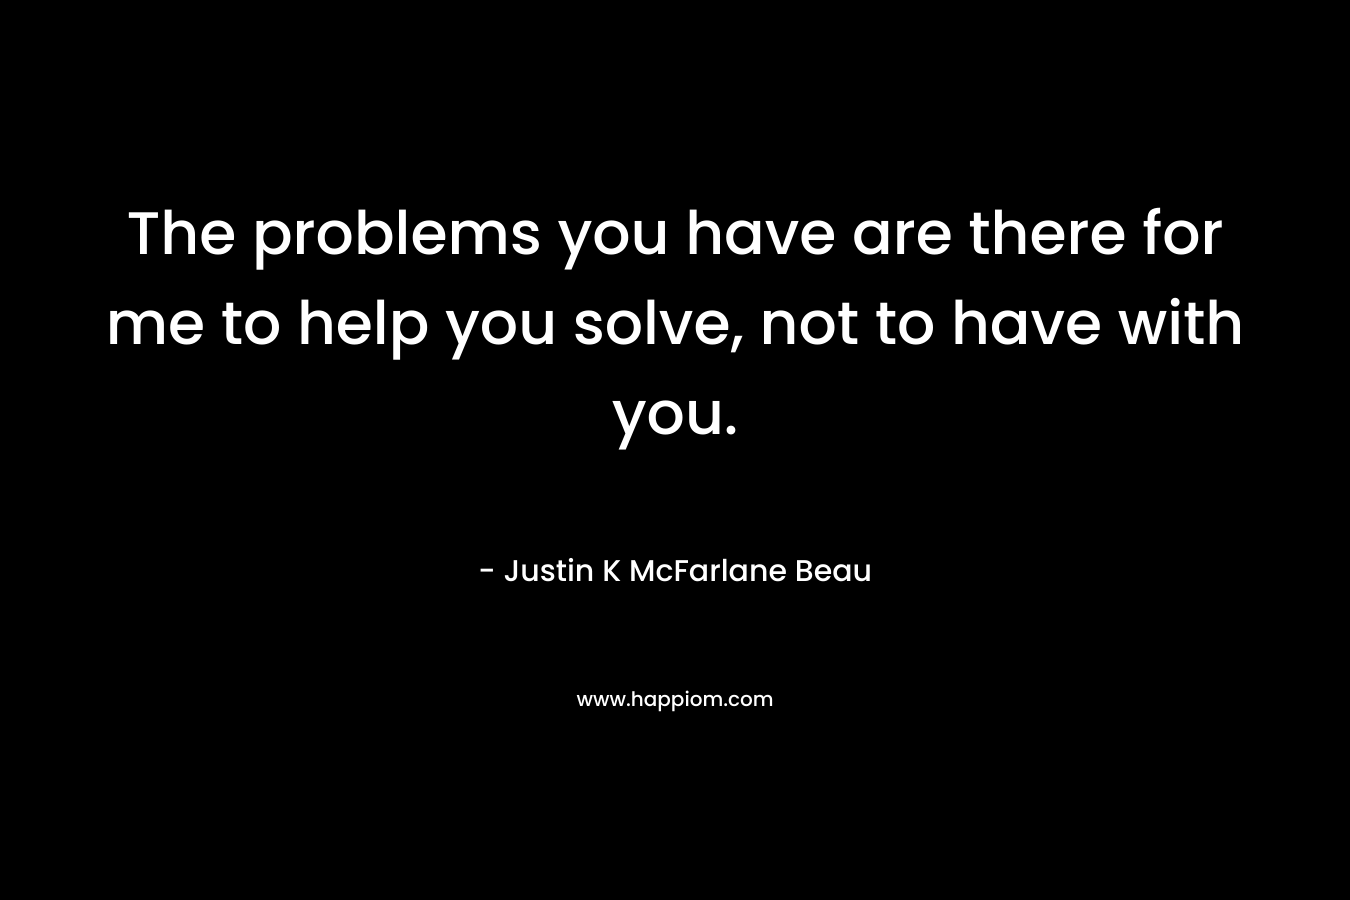 The problems you have are there for me to help you solve, not to have with you. – Justin K McFarlane Beau